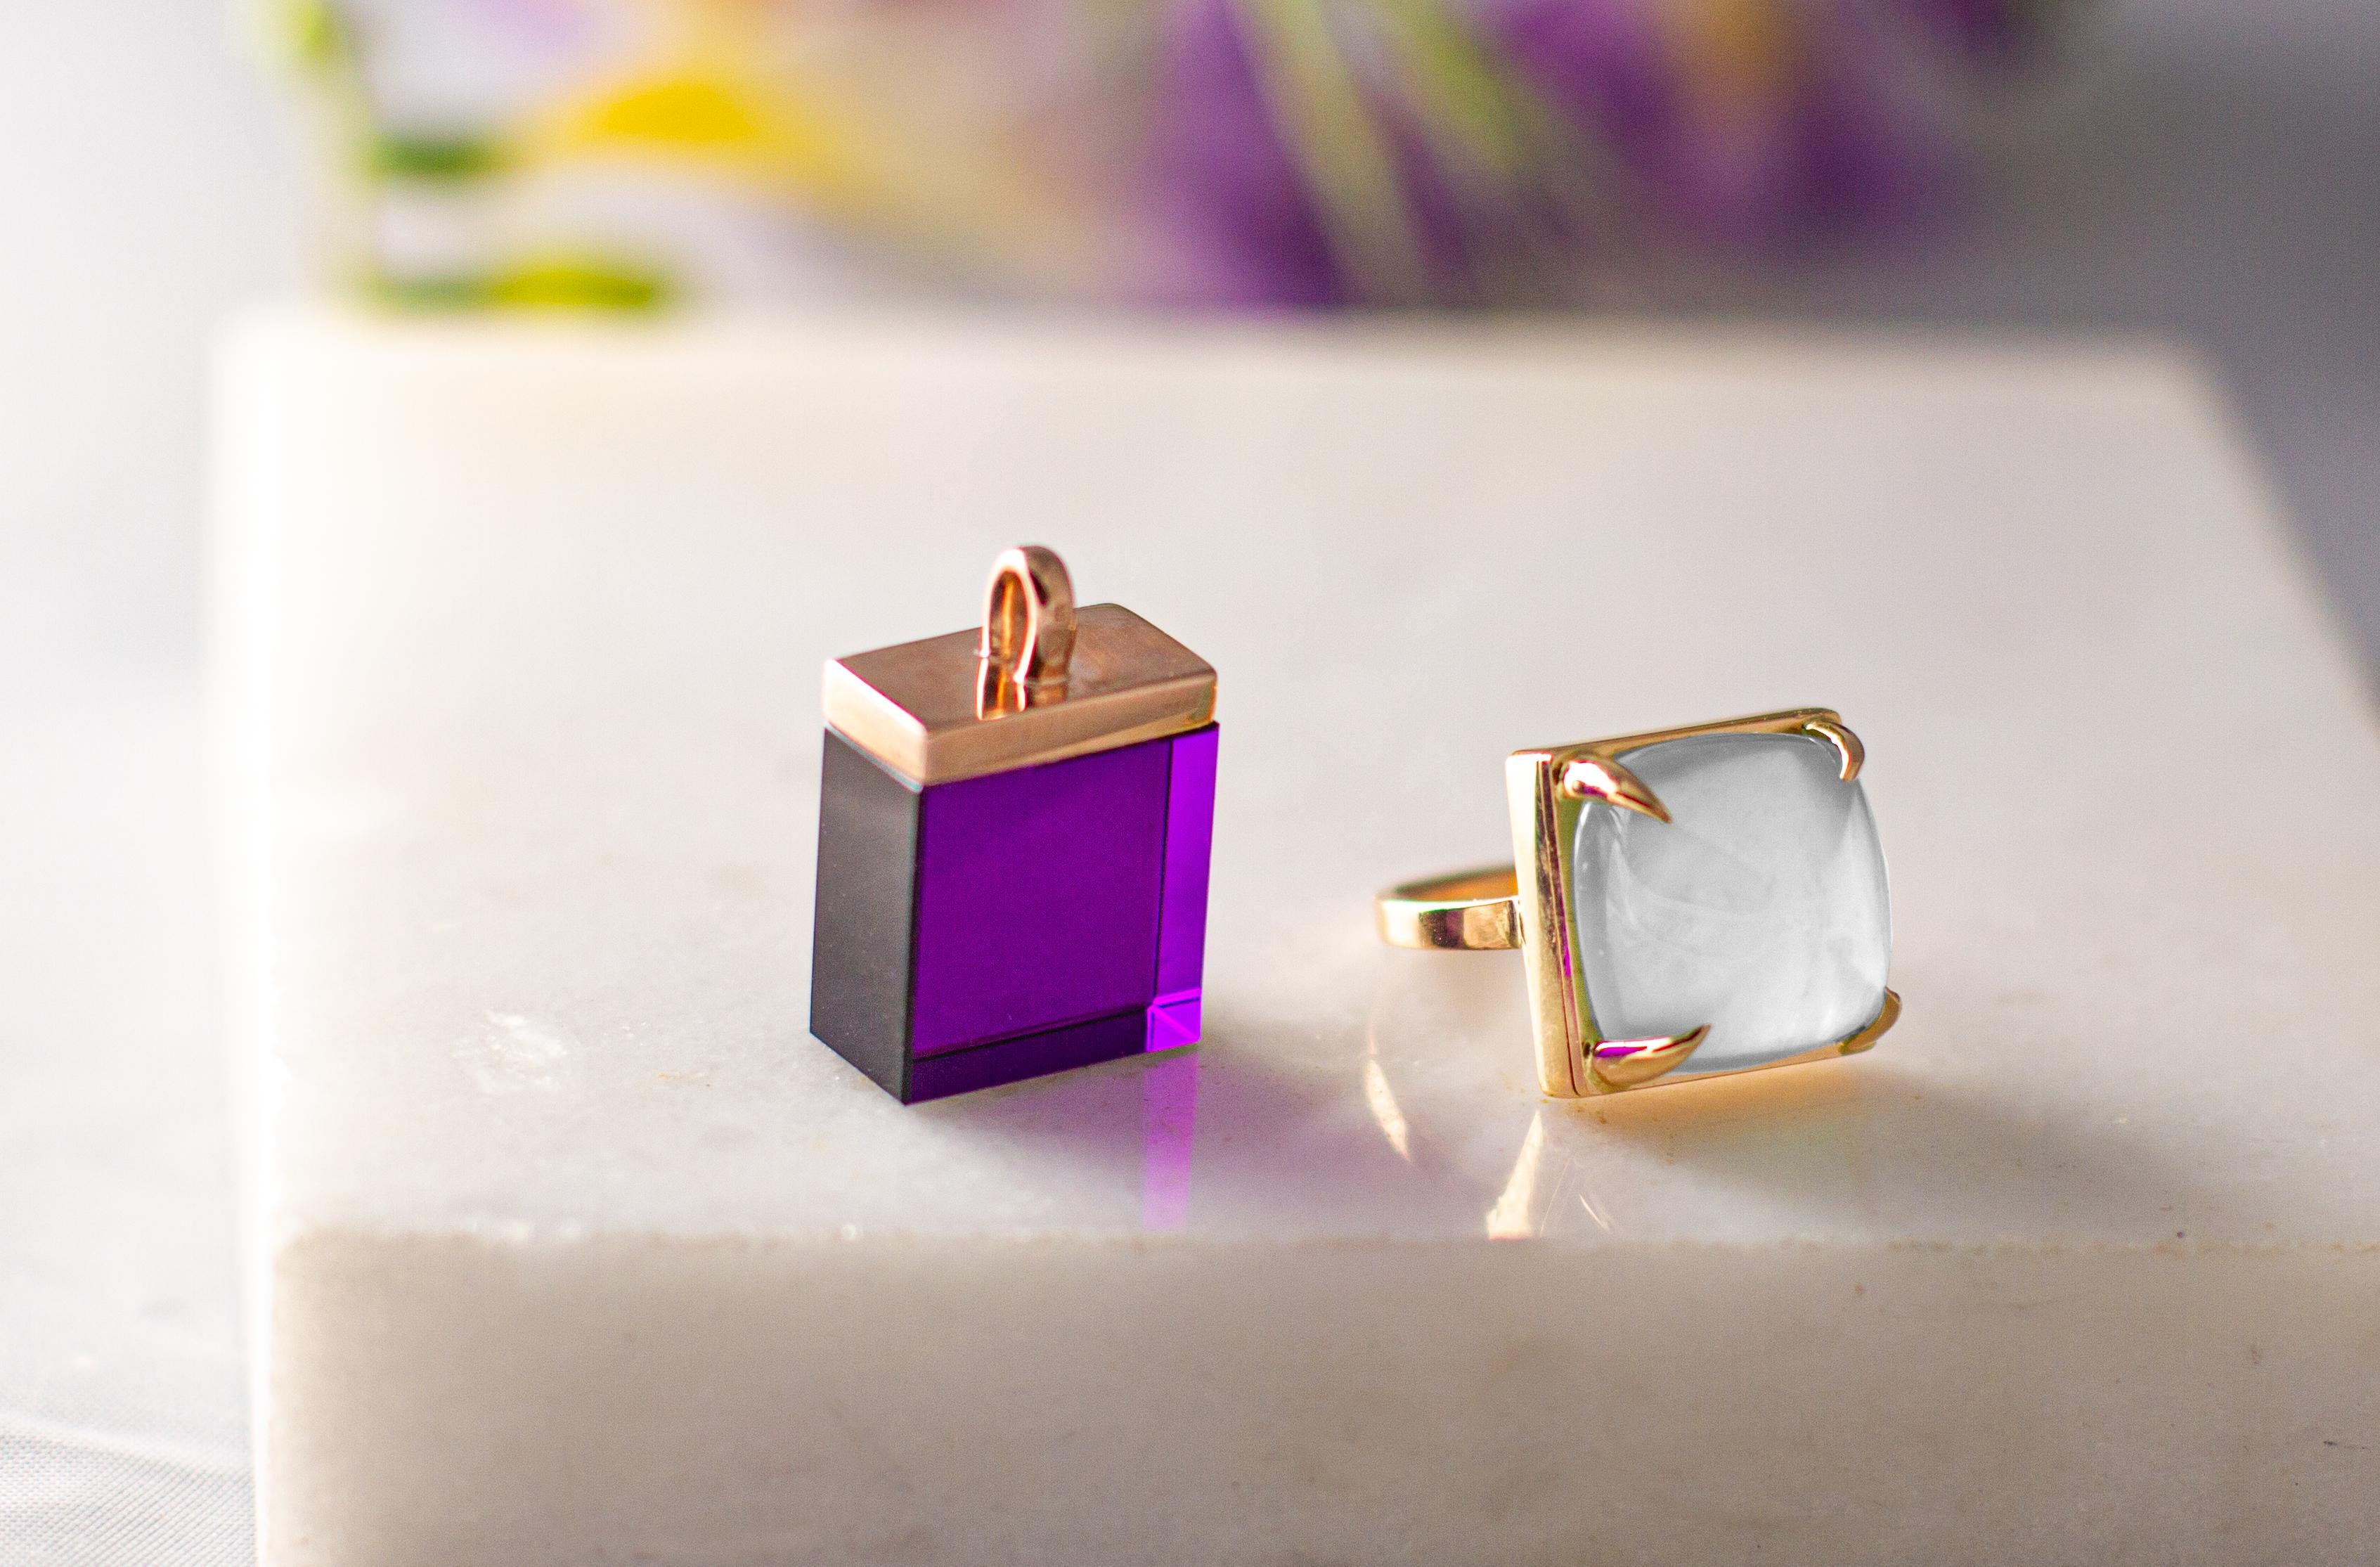 This ring is made of 18 karat rose gold and sugarloaf cut quartz. This ring can be personally signed. 

When for most of the gem it works the way: the smaller prongs the better. This is the shape and size of the gem that we really enjoy to see